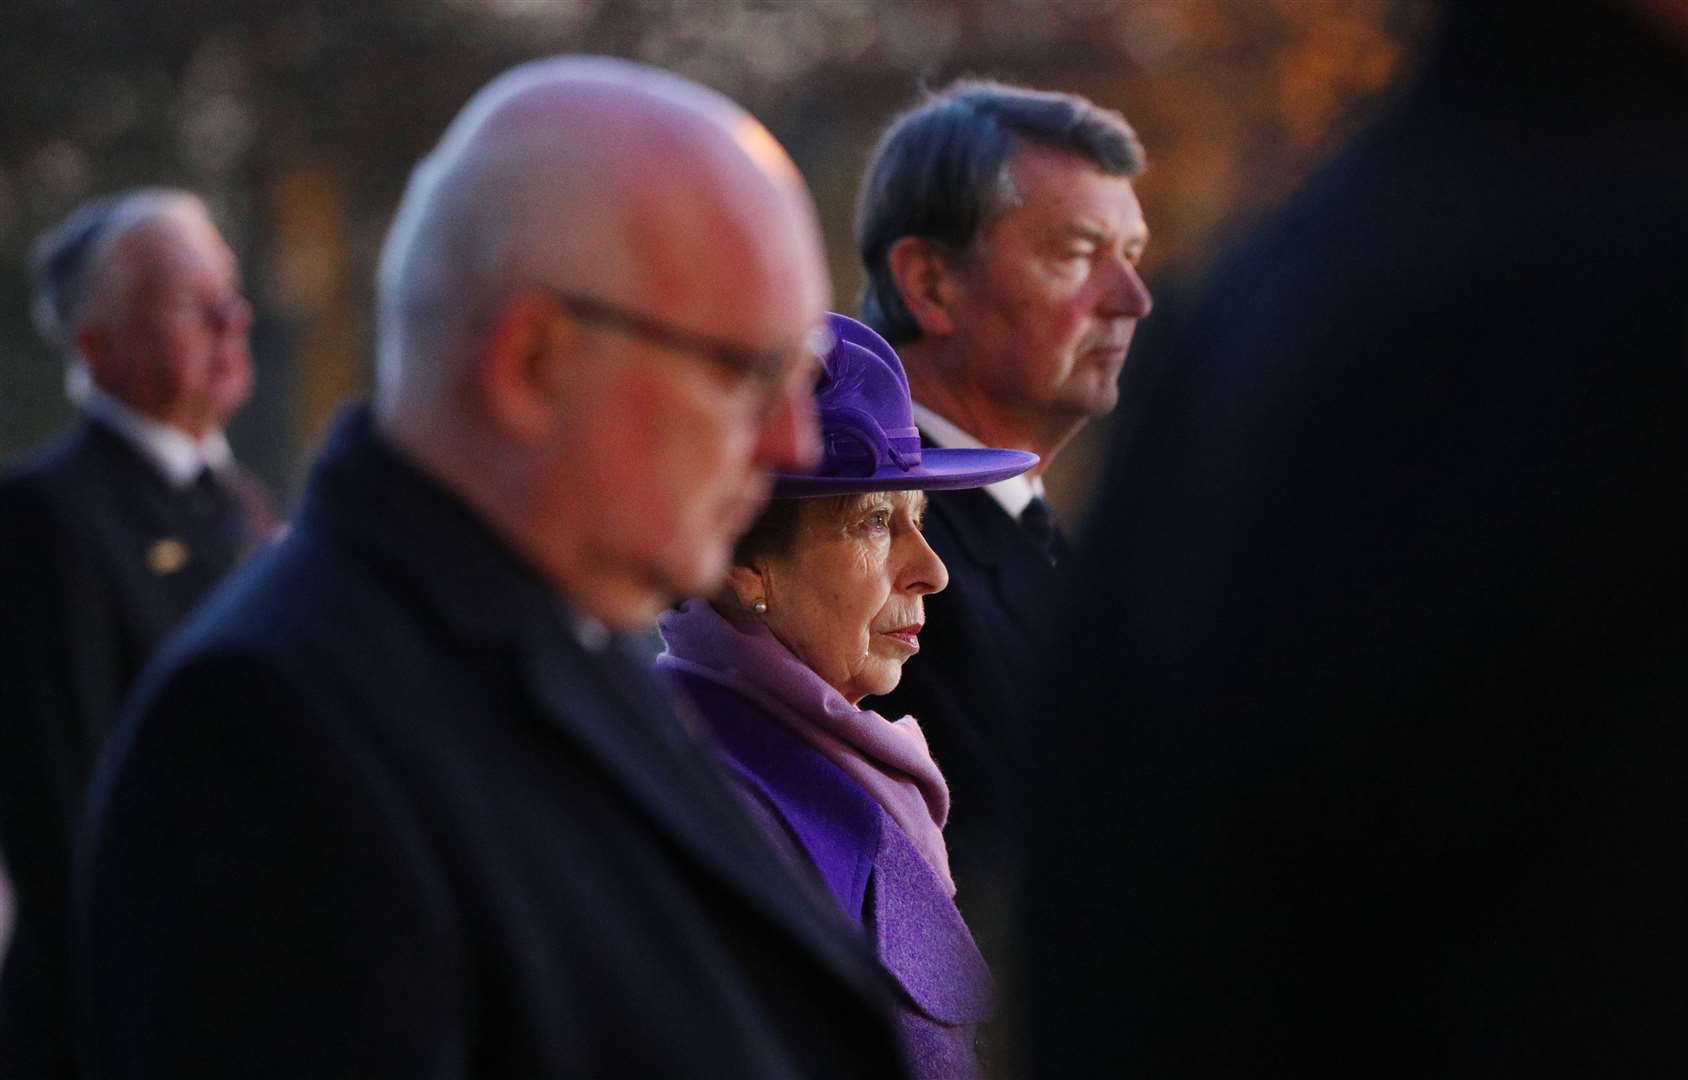 The Princess Royal (centre) alongside Vice Admiral Sir Tim Laurence (right) at the service (Jonathan Brady/PA)